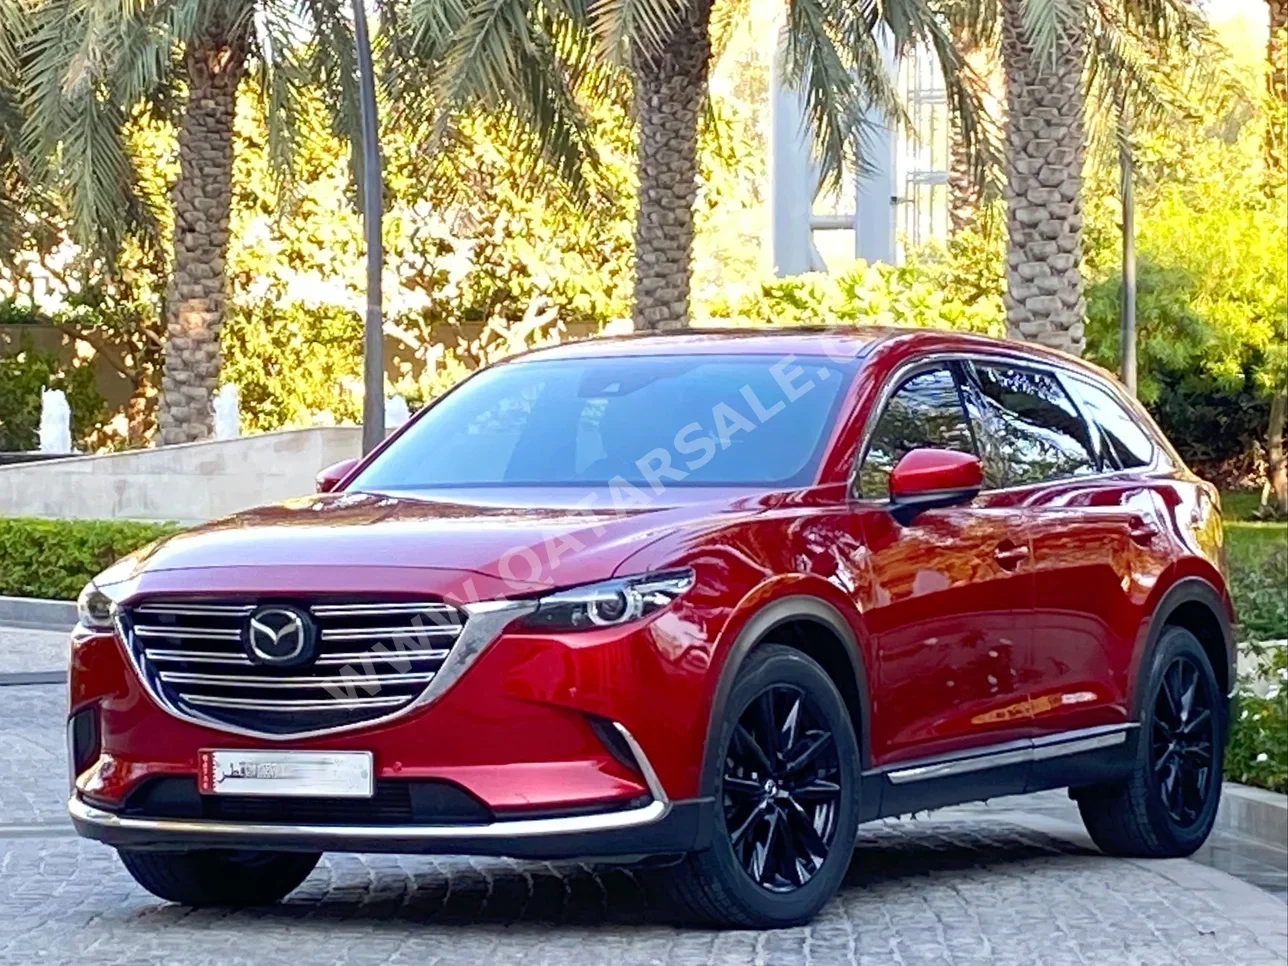 Mazda  CX  9  2017  Automatic  177,000 Km  4 Cylinder  All Wheel Drive (AWD)  SUV  Red